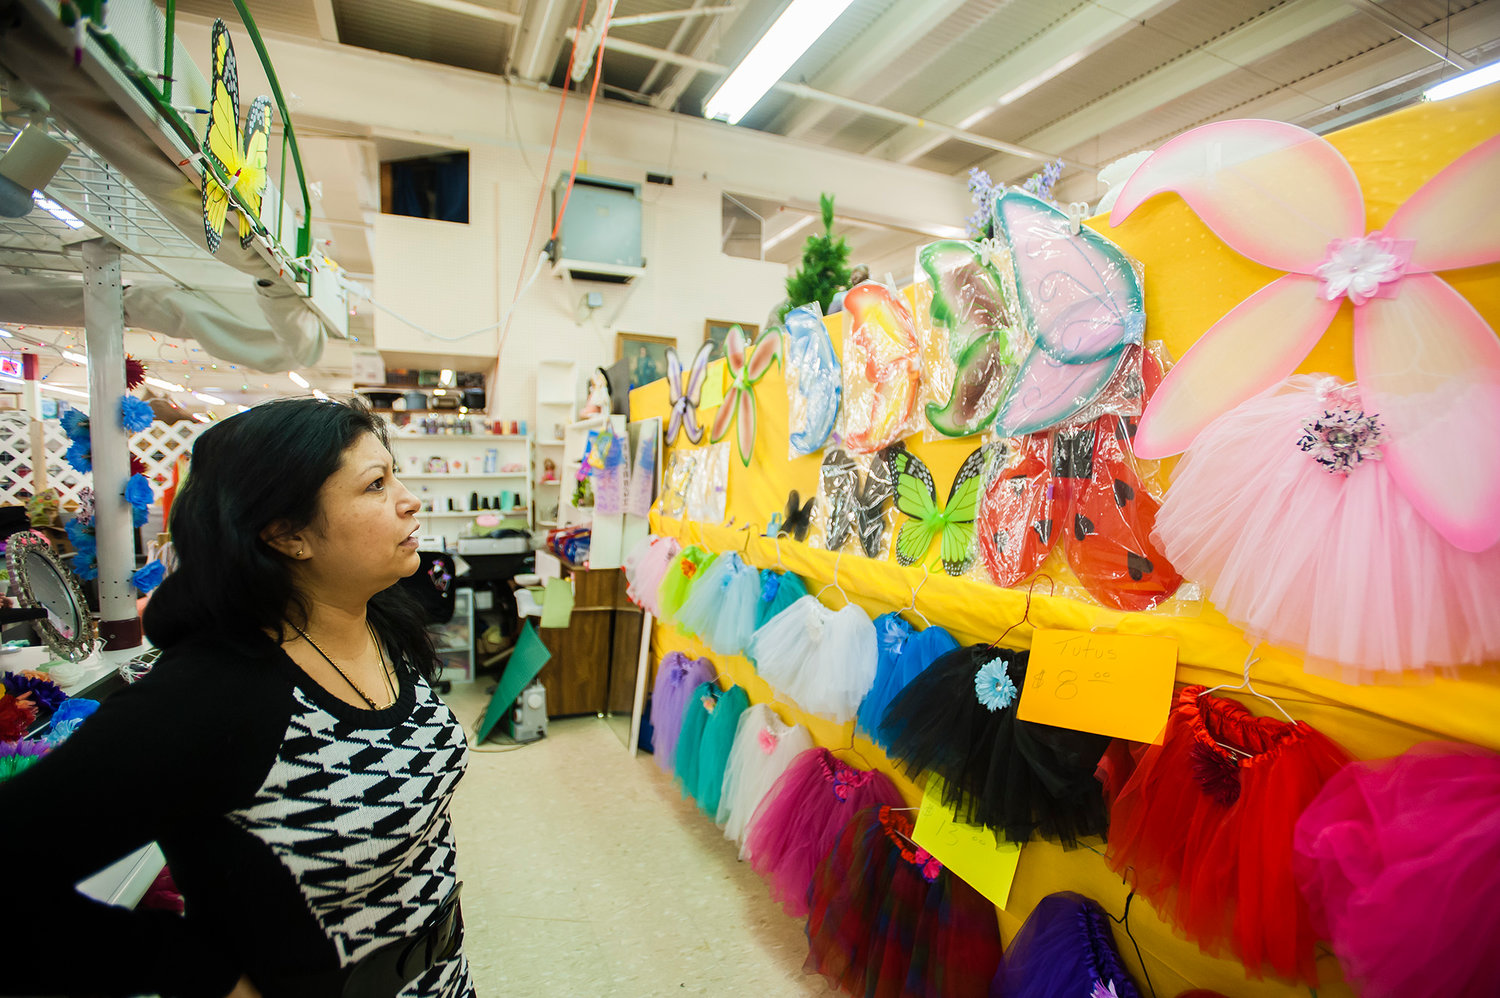 Rosa Romo looks at butterfly wings and tutus that hang on the wall of her booth at Yard Birds Shopping Mall in Chehalis on Tuesday, Feb. 25. Romo and her daughter, Nancy Hernandez, have rented the stall for about a year.